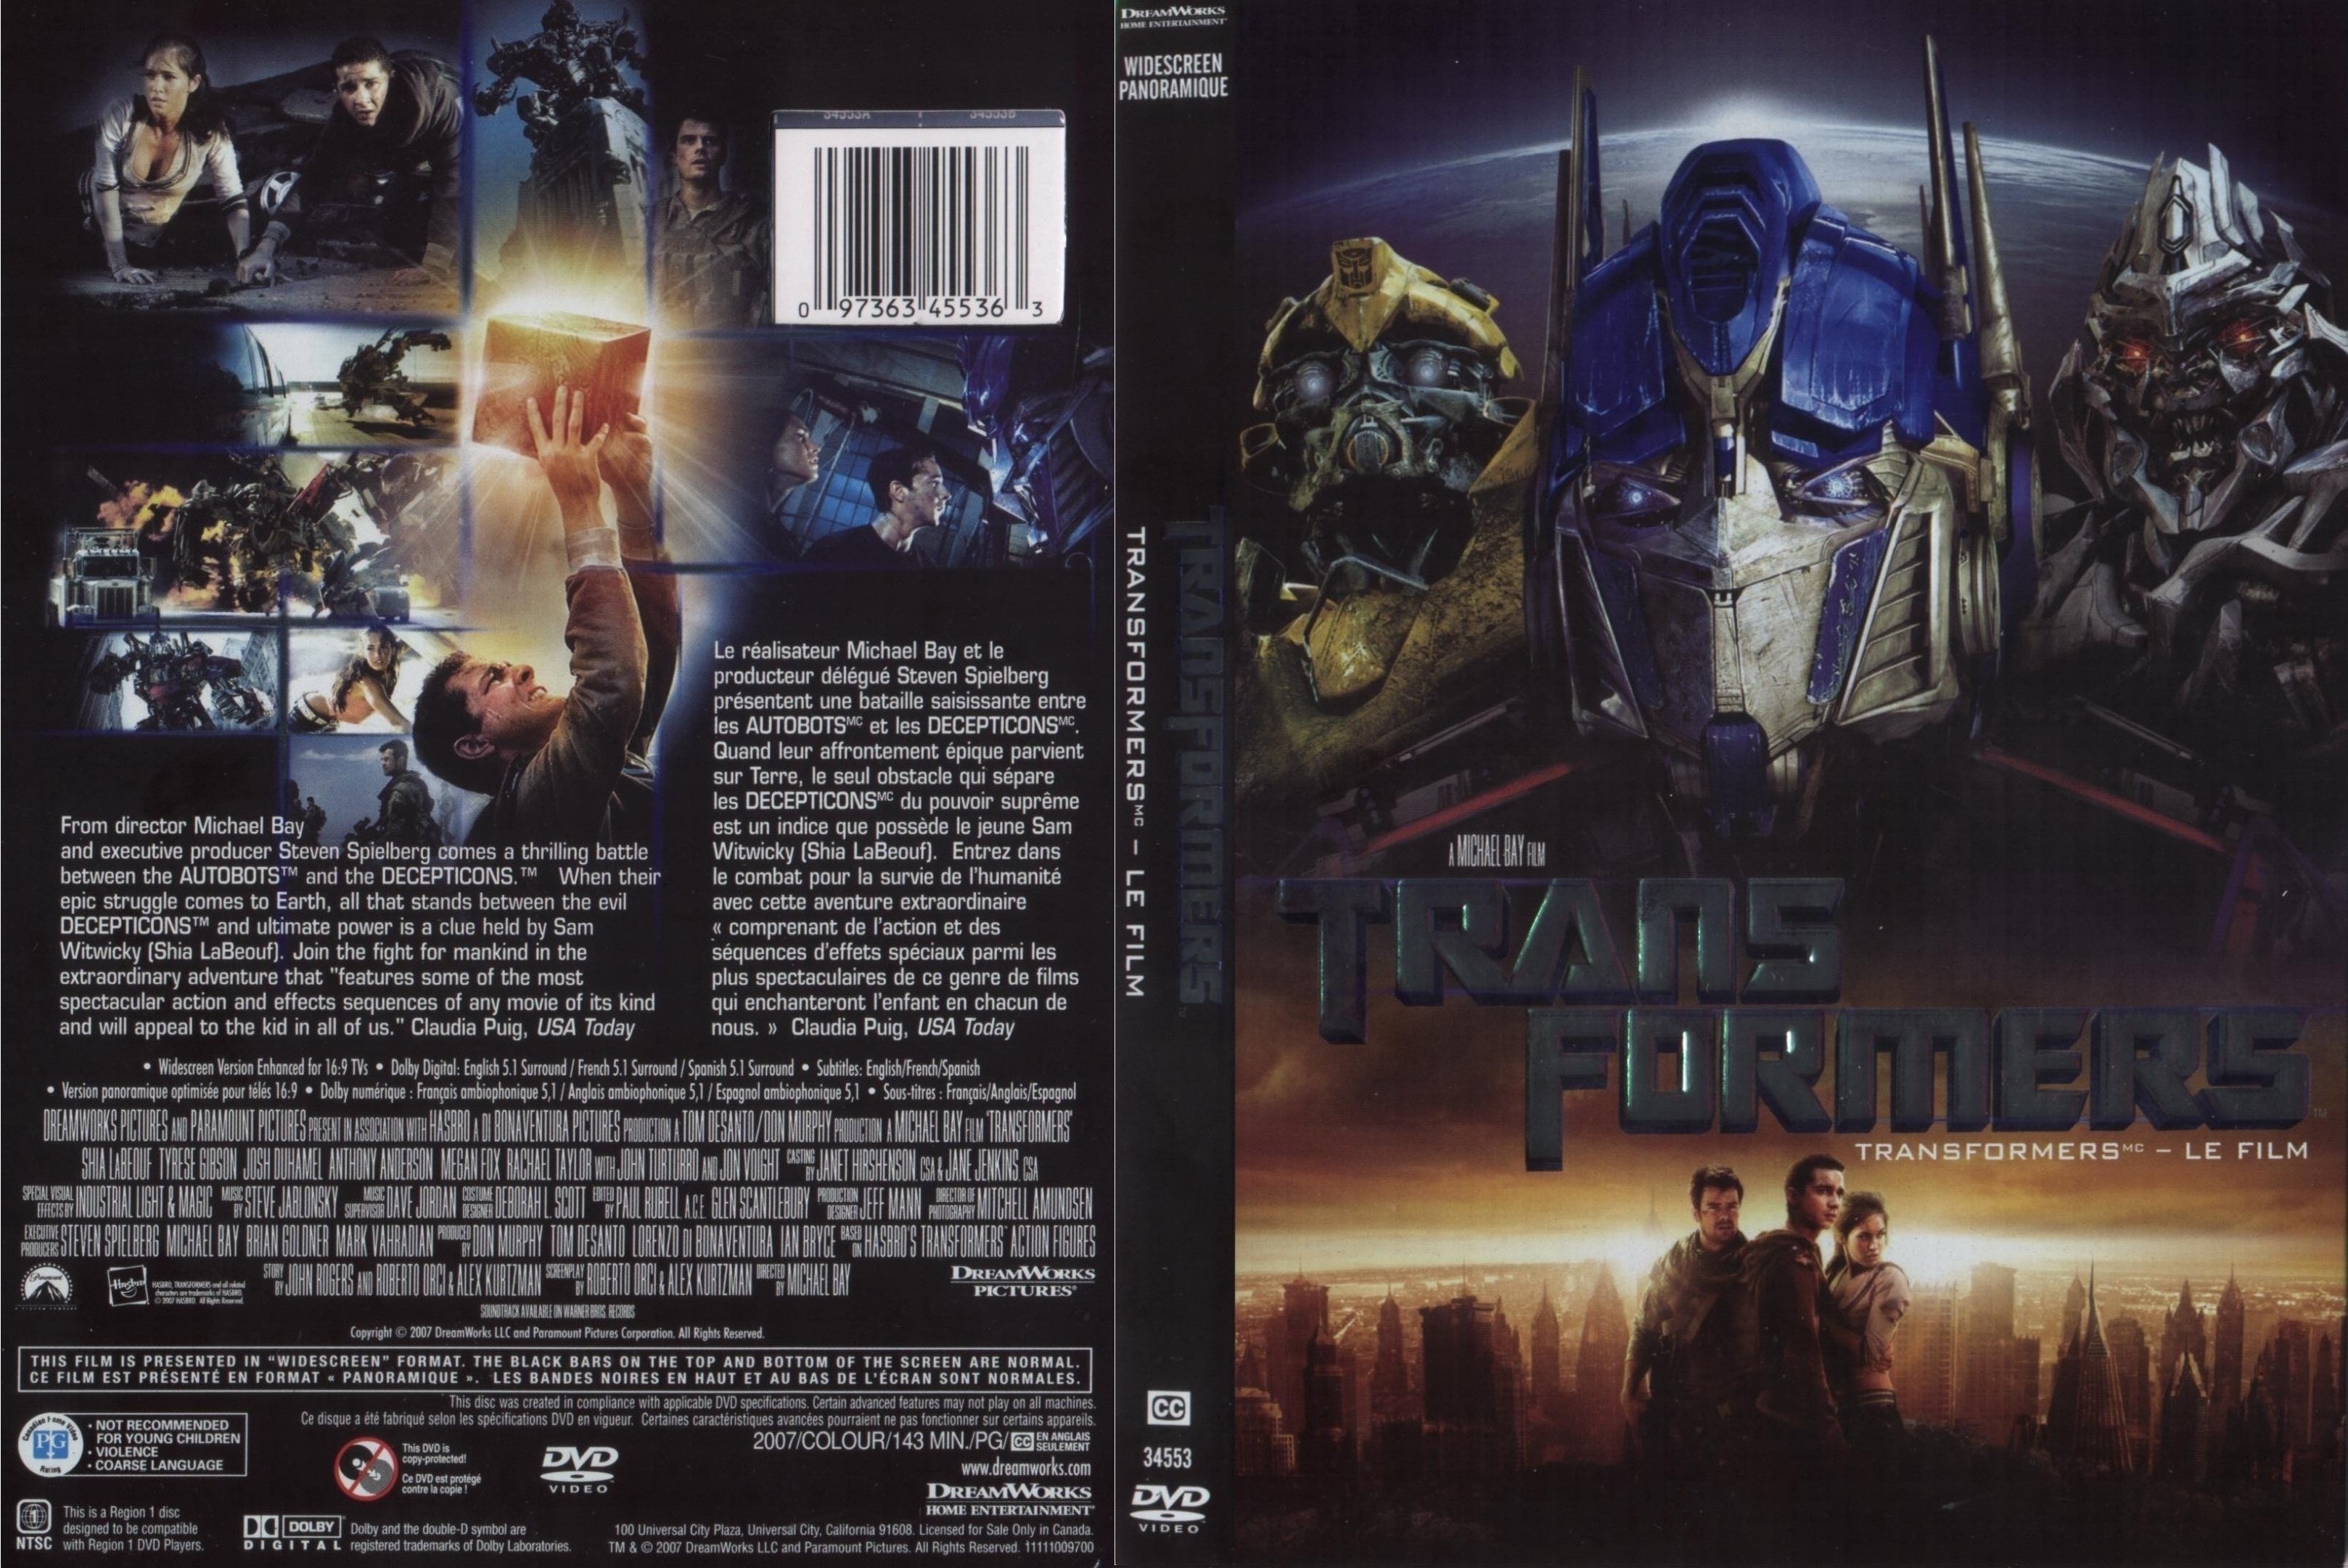 Jaquette DVD Transformers (Canadienne)